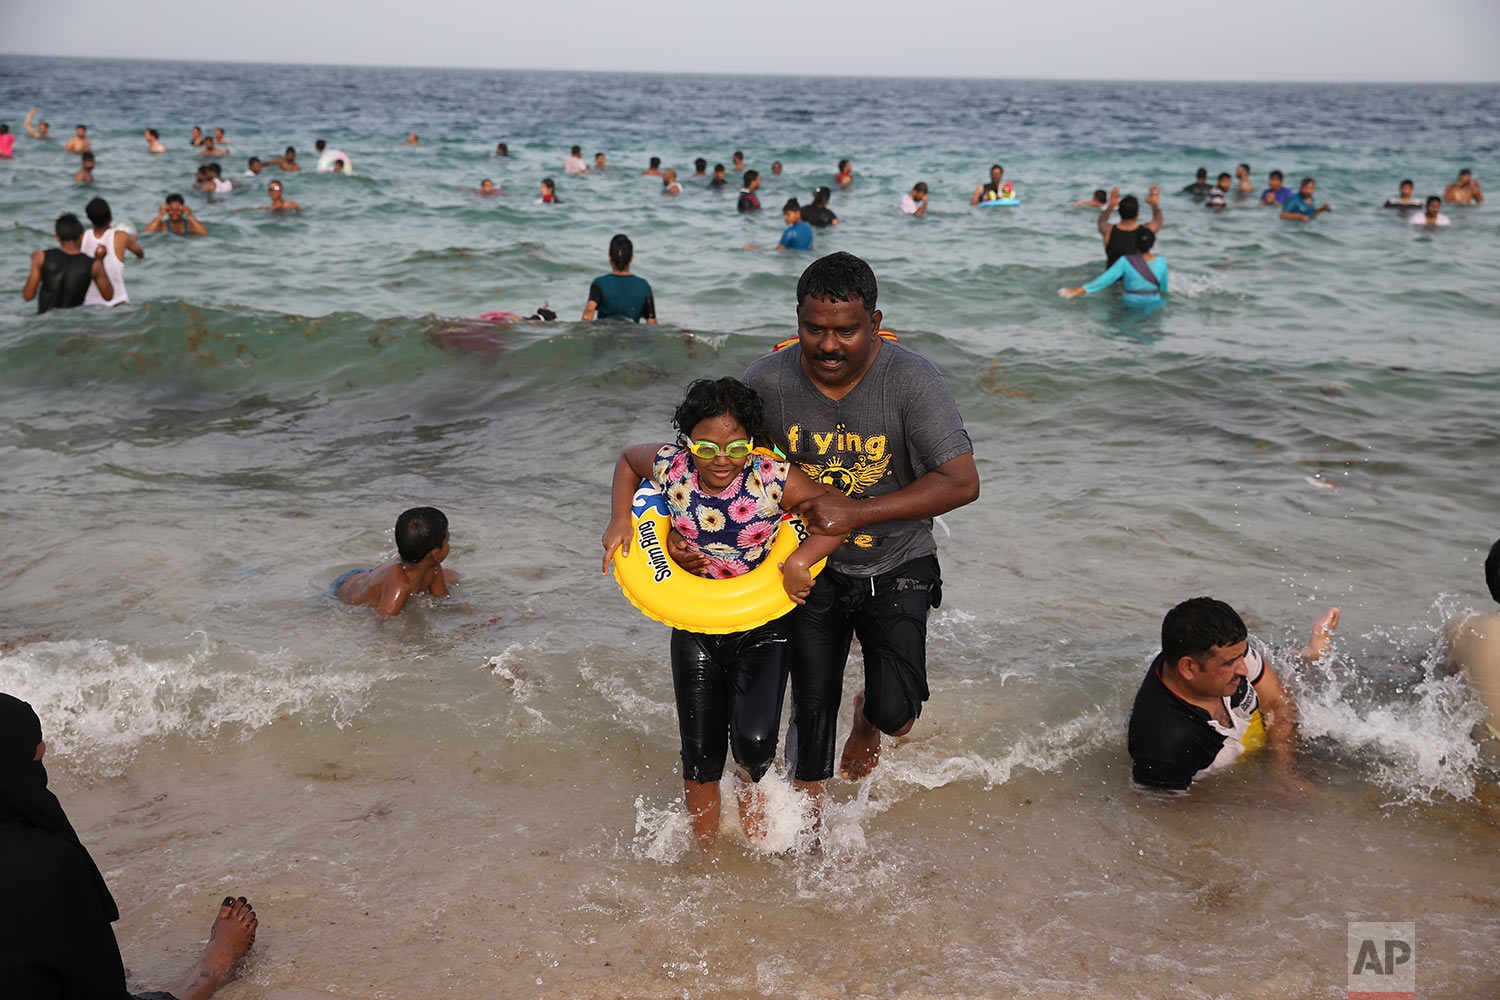  In this Friday, April 19, 2019 photo, a man helps a girl to get out of the water as the people enjoy swimming at the Sealine Beach about 40 kms, 25 miles, south of Doha, Qatar. (AP Photo/Kamran Jebreili) 